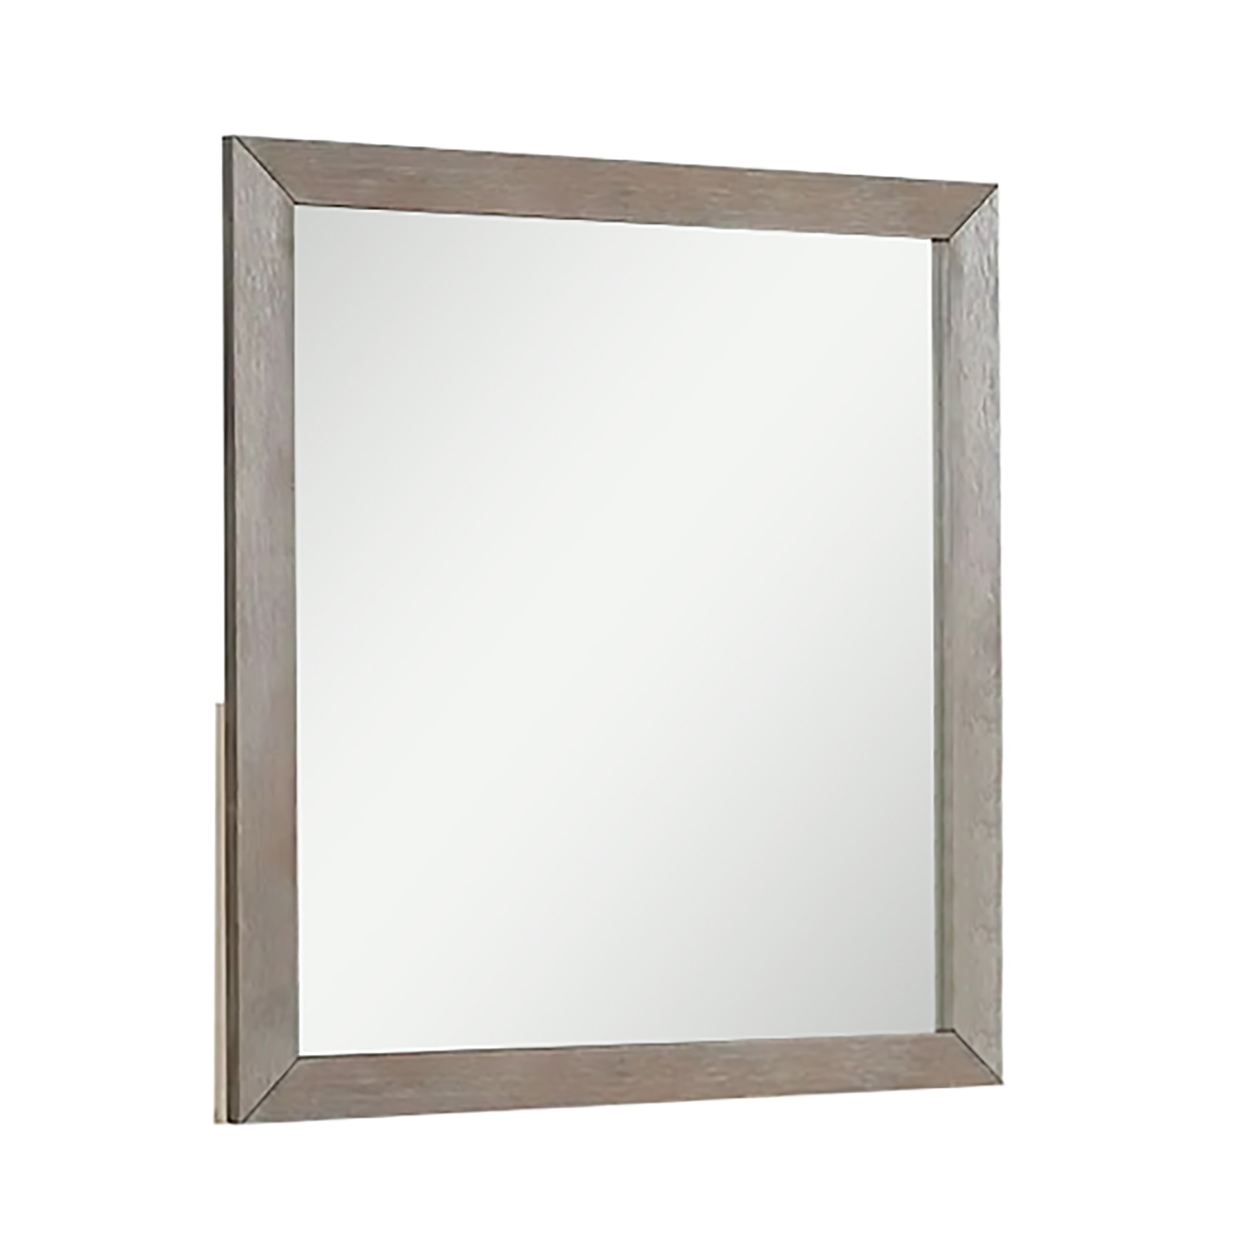 Wall Mirror With Wooden Frame And Grain Details, Natural Brown- Saltoro Sherpi